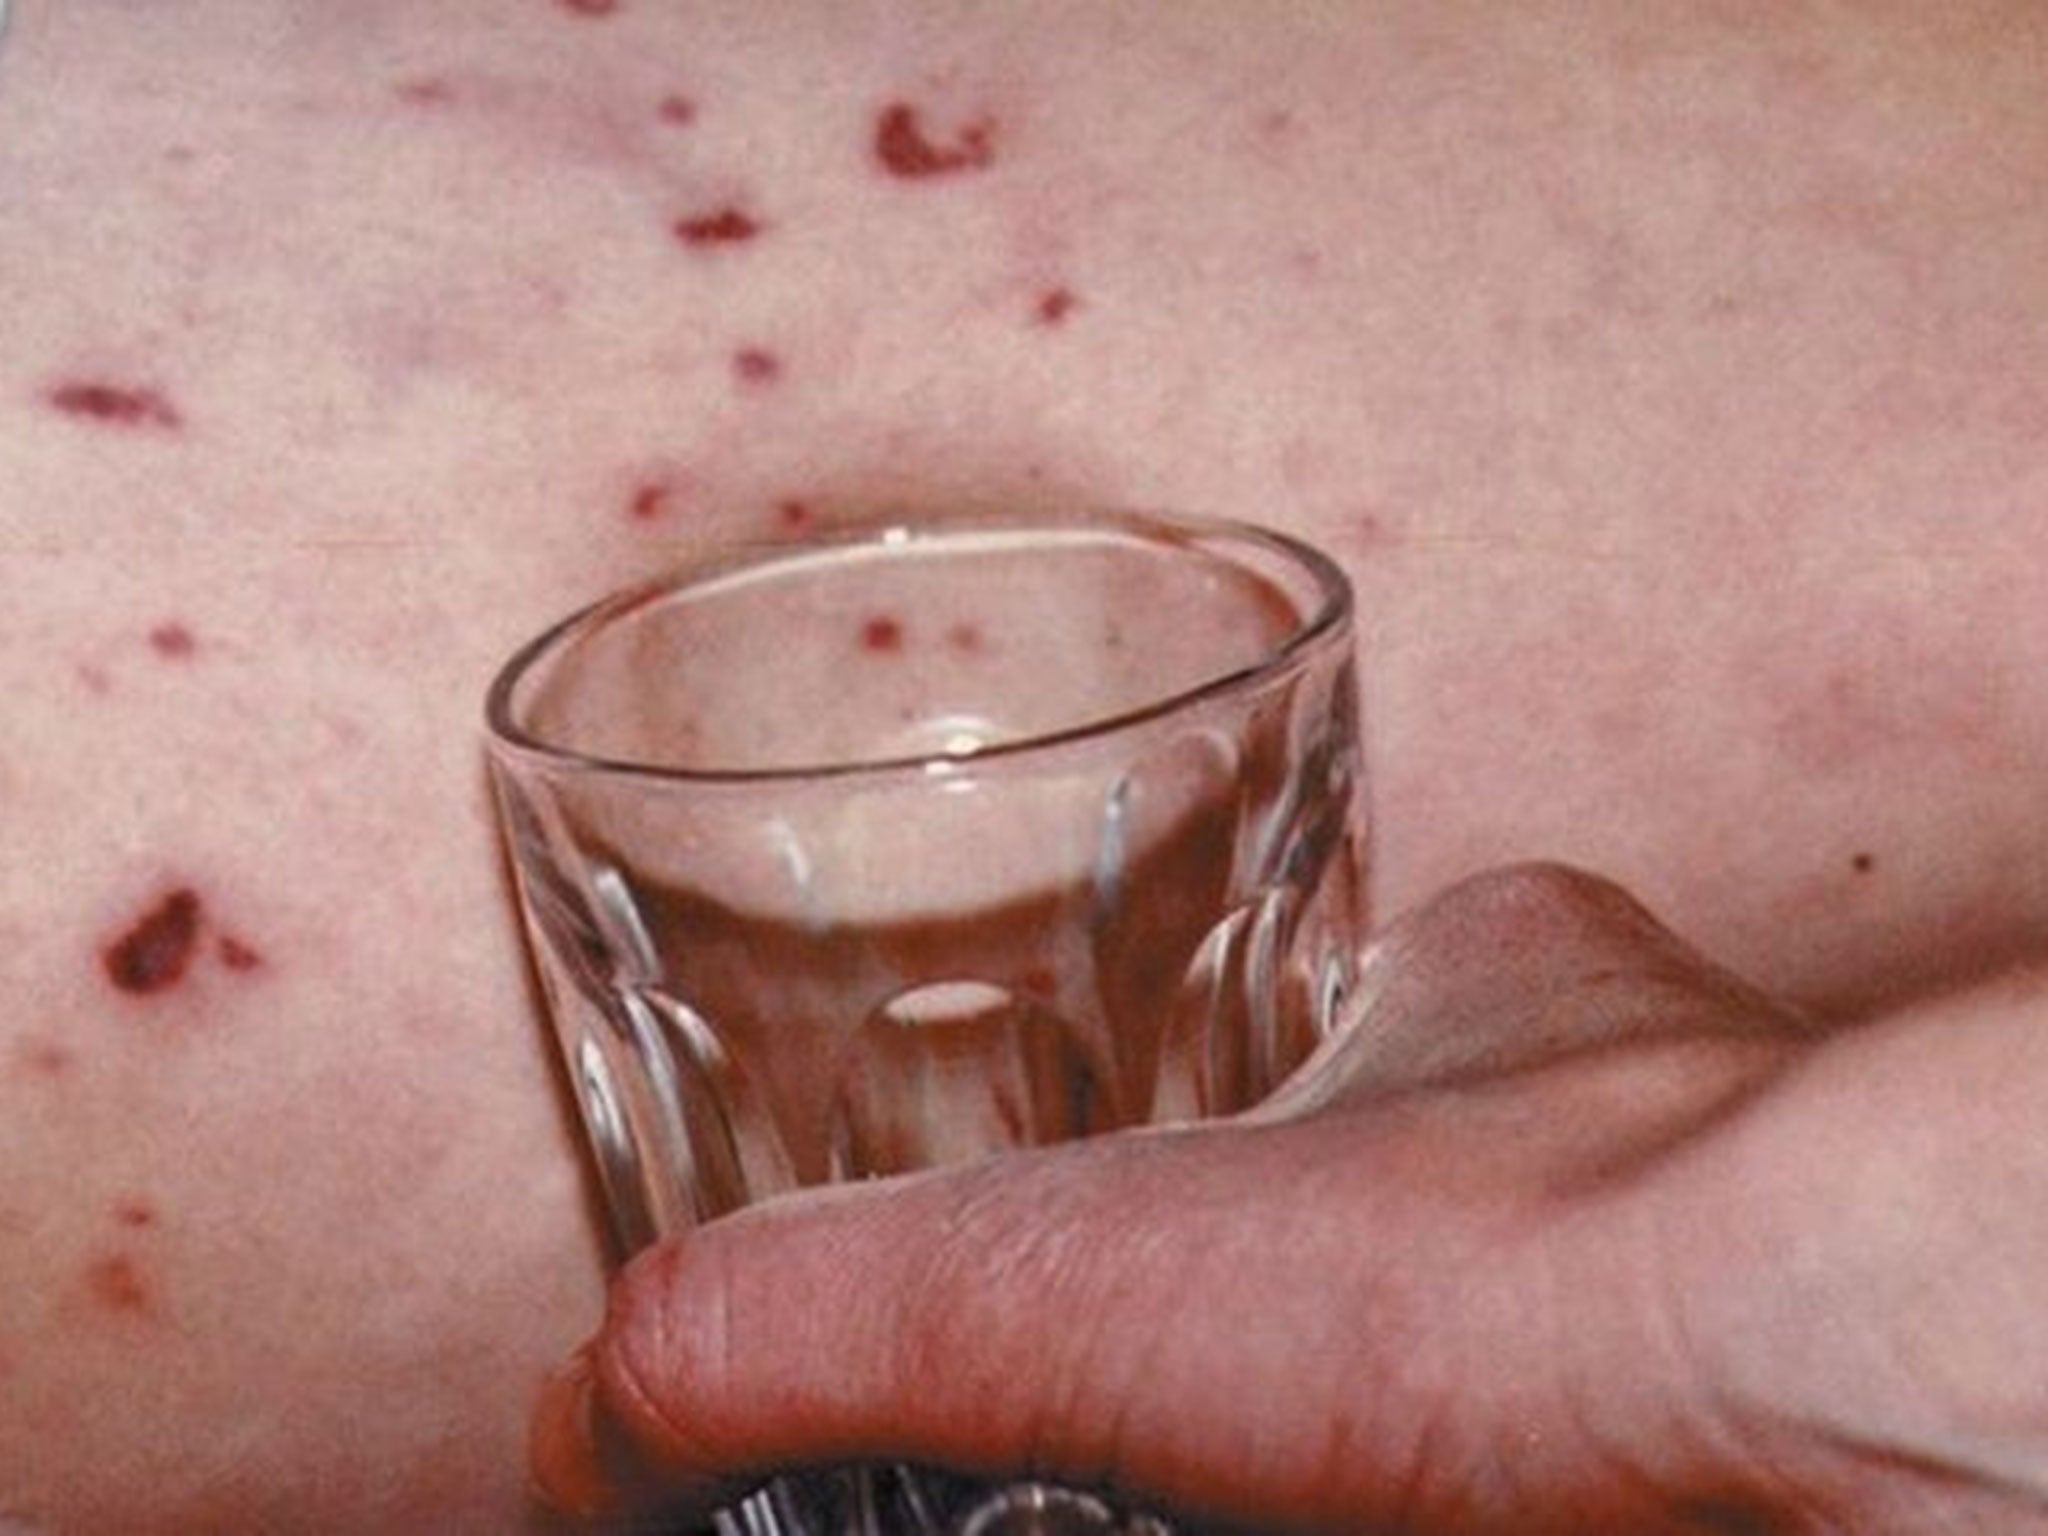 A rash that does not fade when pressed against a glass is a symptom of meningitis